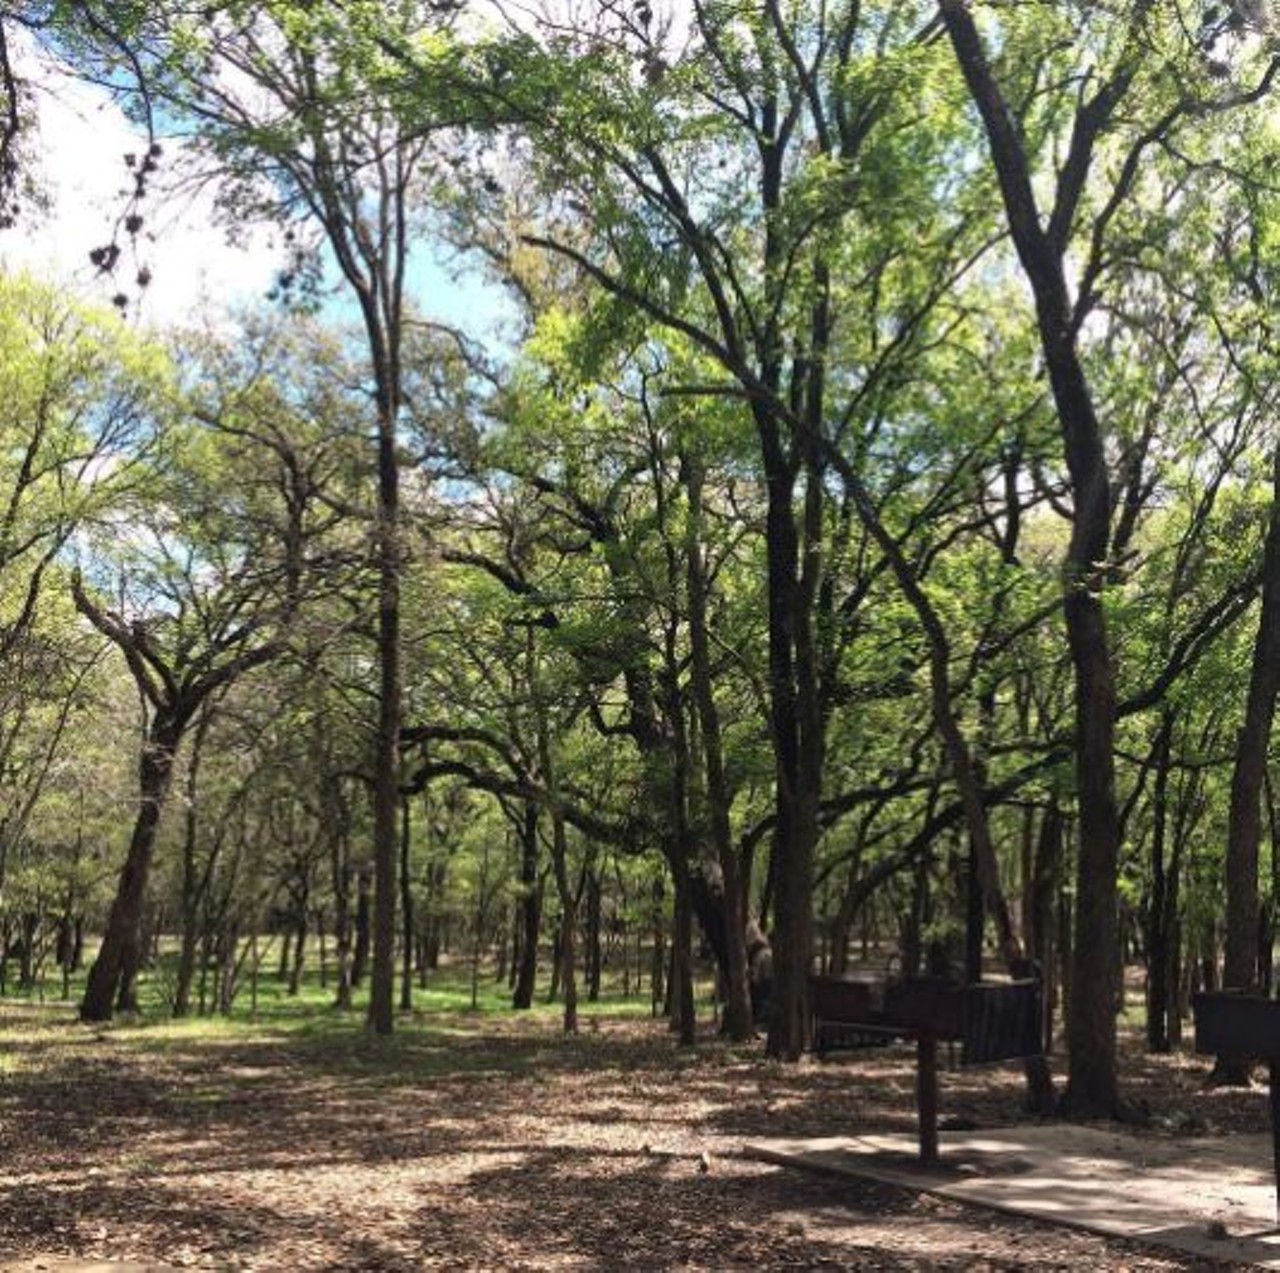 McAllister Park 
13102 Jones Maltsberger Road, (210) 207-7275 
Grab some friends and head to McAllister Park for a scenic picnic. There&#146;s also a great dog park, so don&#146;t forget to bring your pet along, too.  
Photo via Instagram, lugxuria